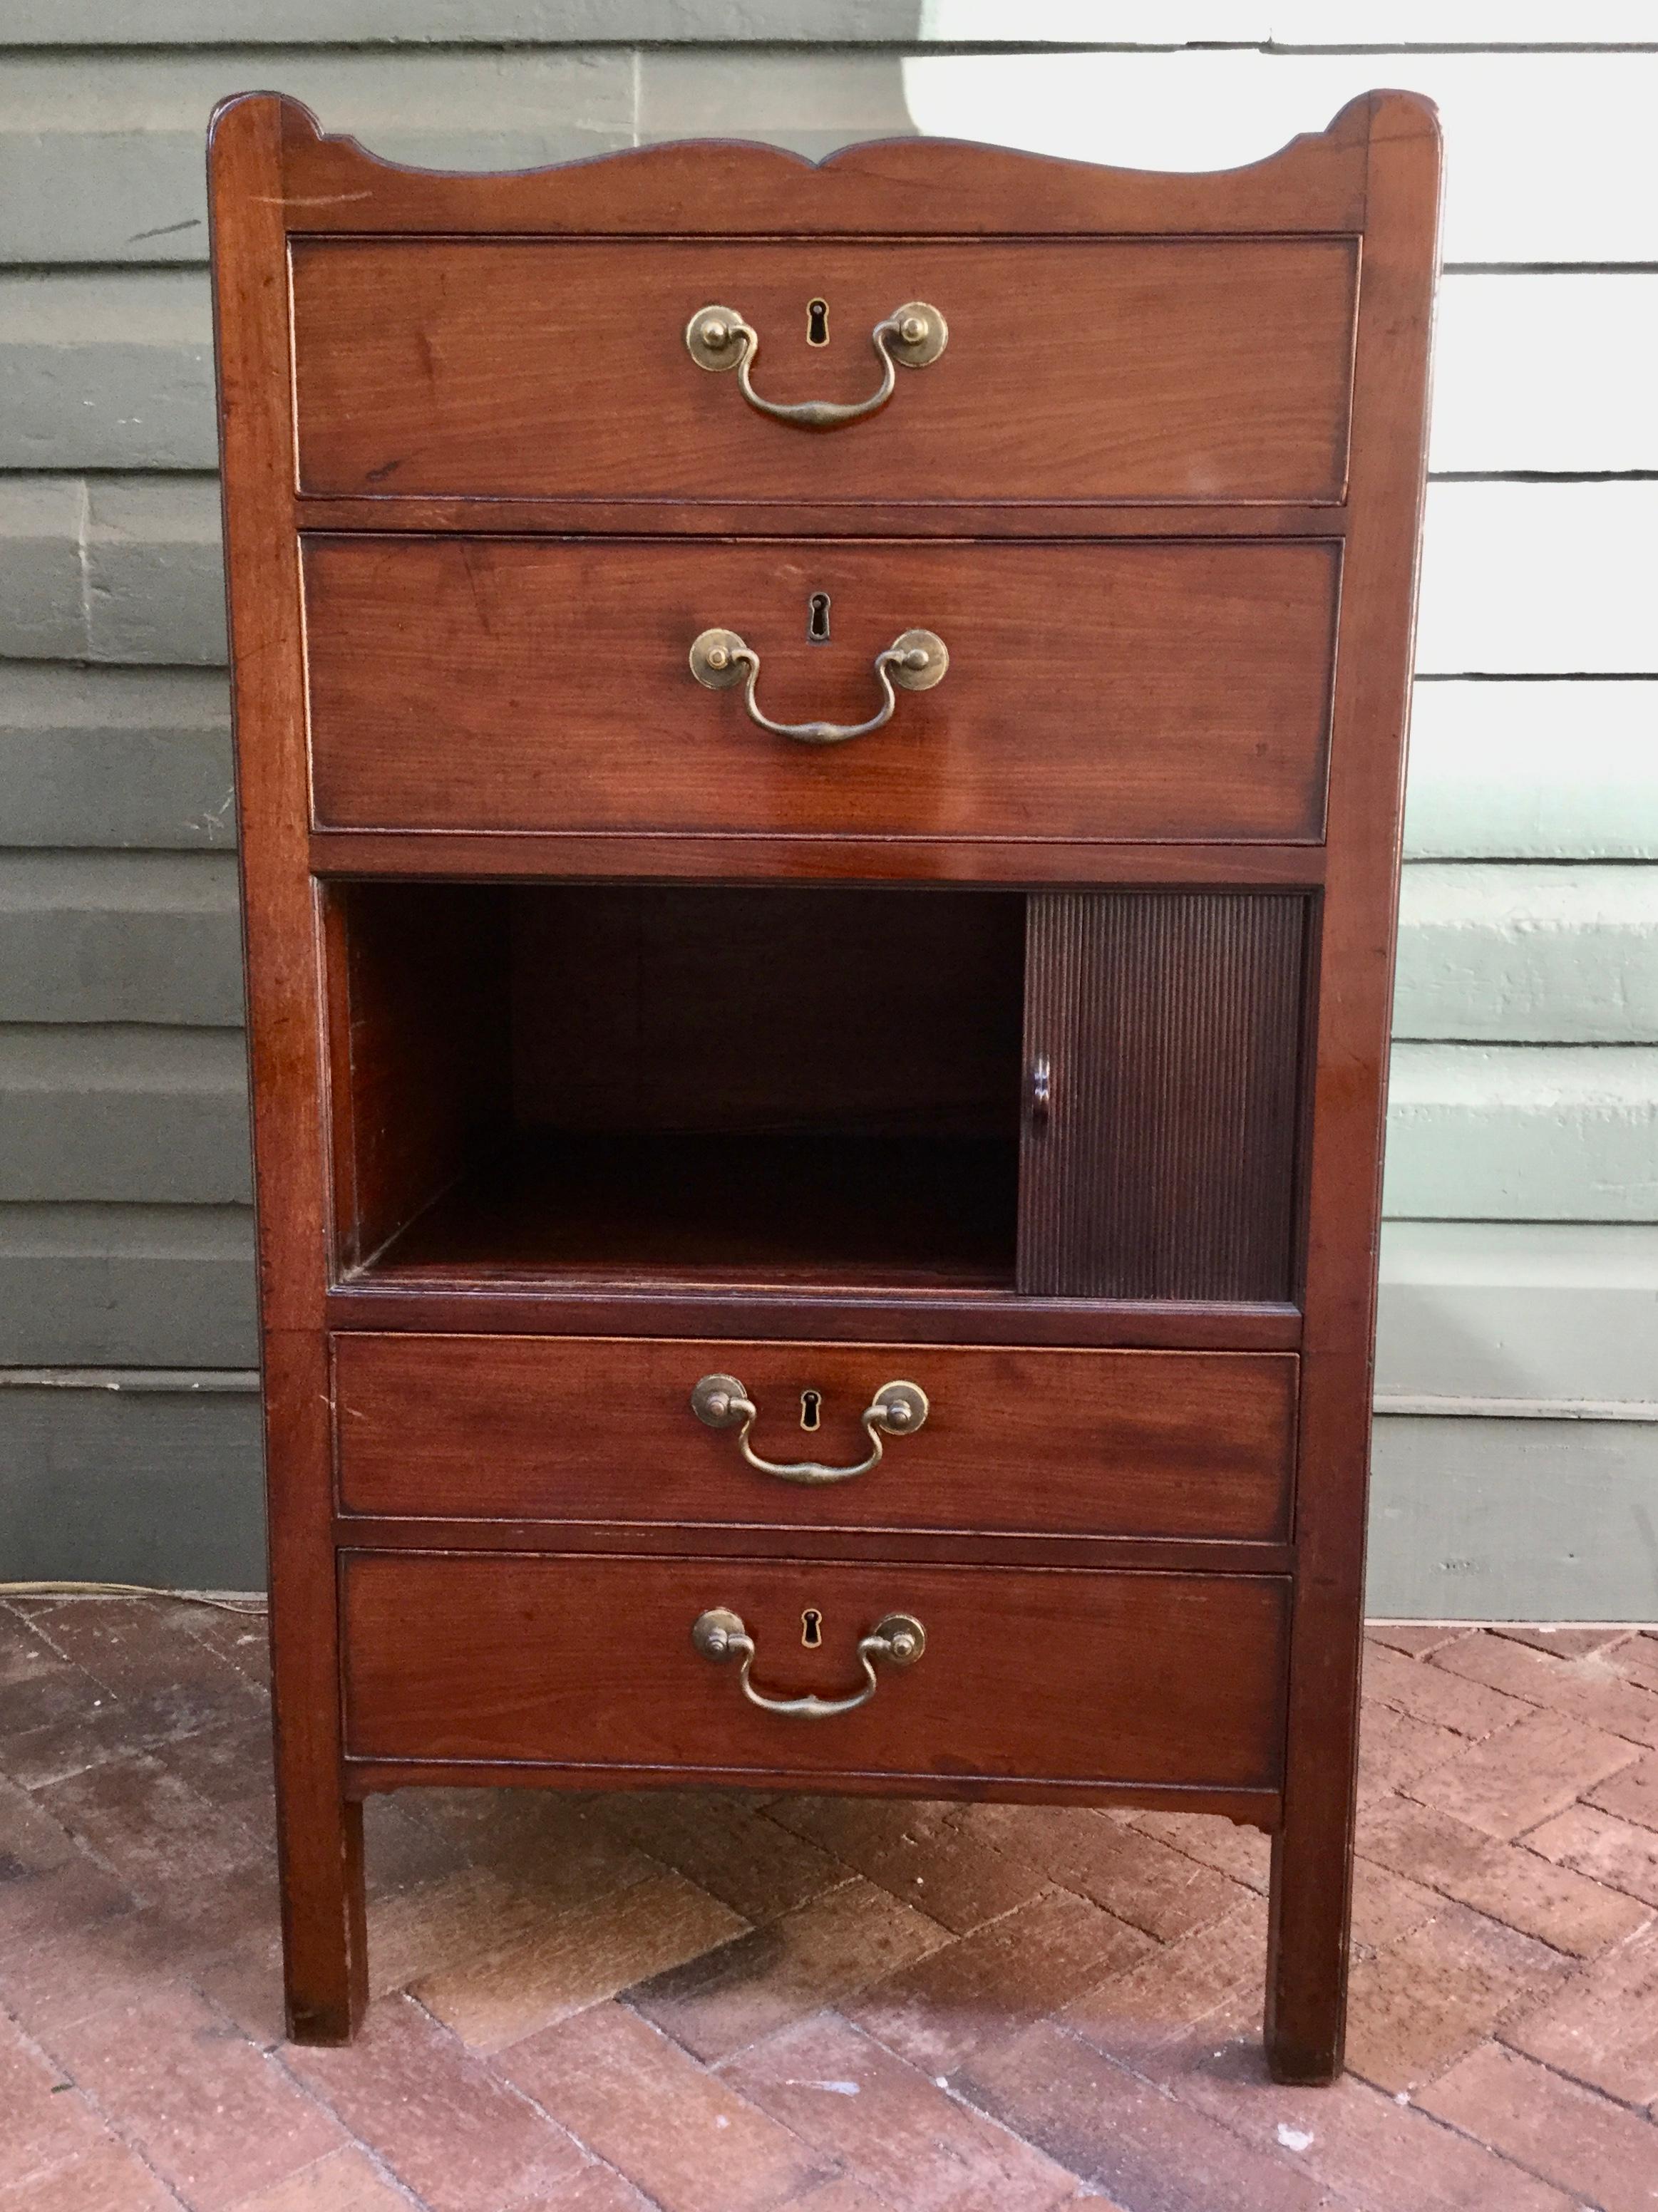 This period English Georgian dressing stand is made out of solid mahogany with oak lined drawers. The dressing commode has two drawers above a tambor cabinet door and two drawers below giving the chest prefect balance. The dressing chest has the